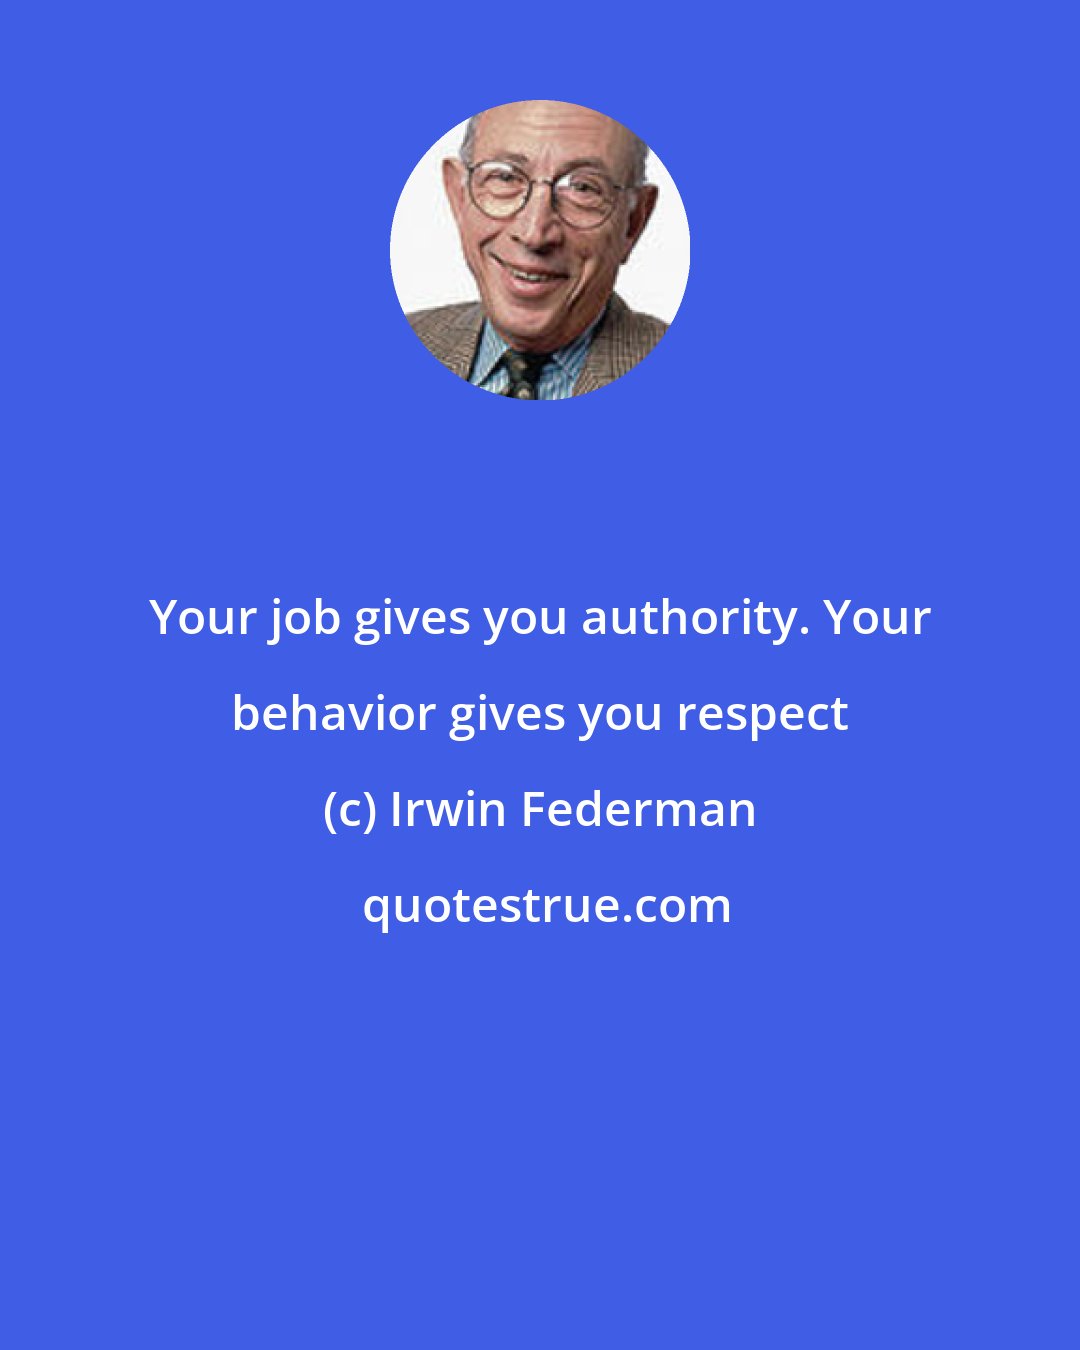 Irwin Federman: Your job gives you authority. Your behavior gives you respect